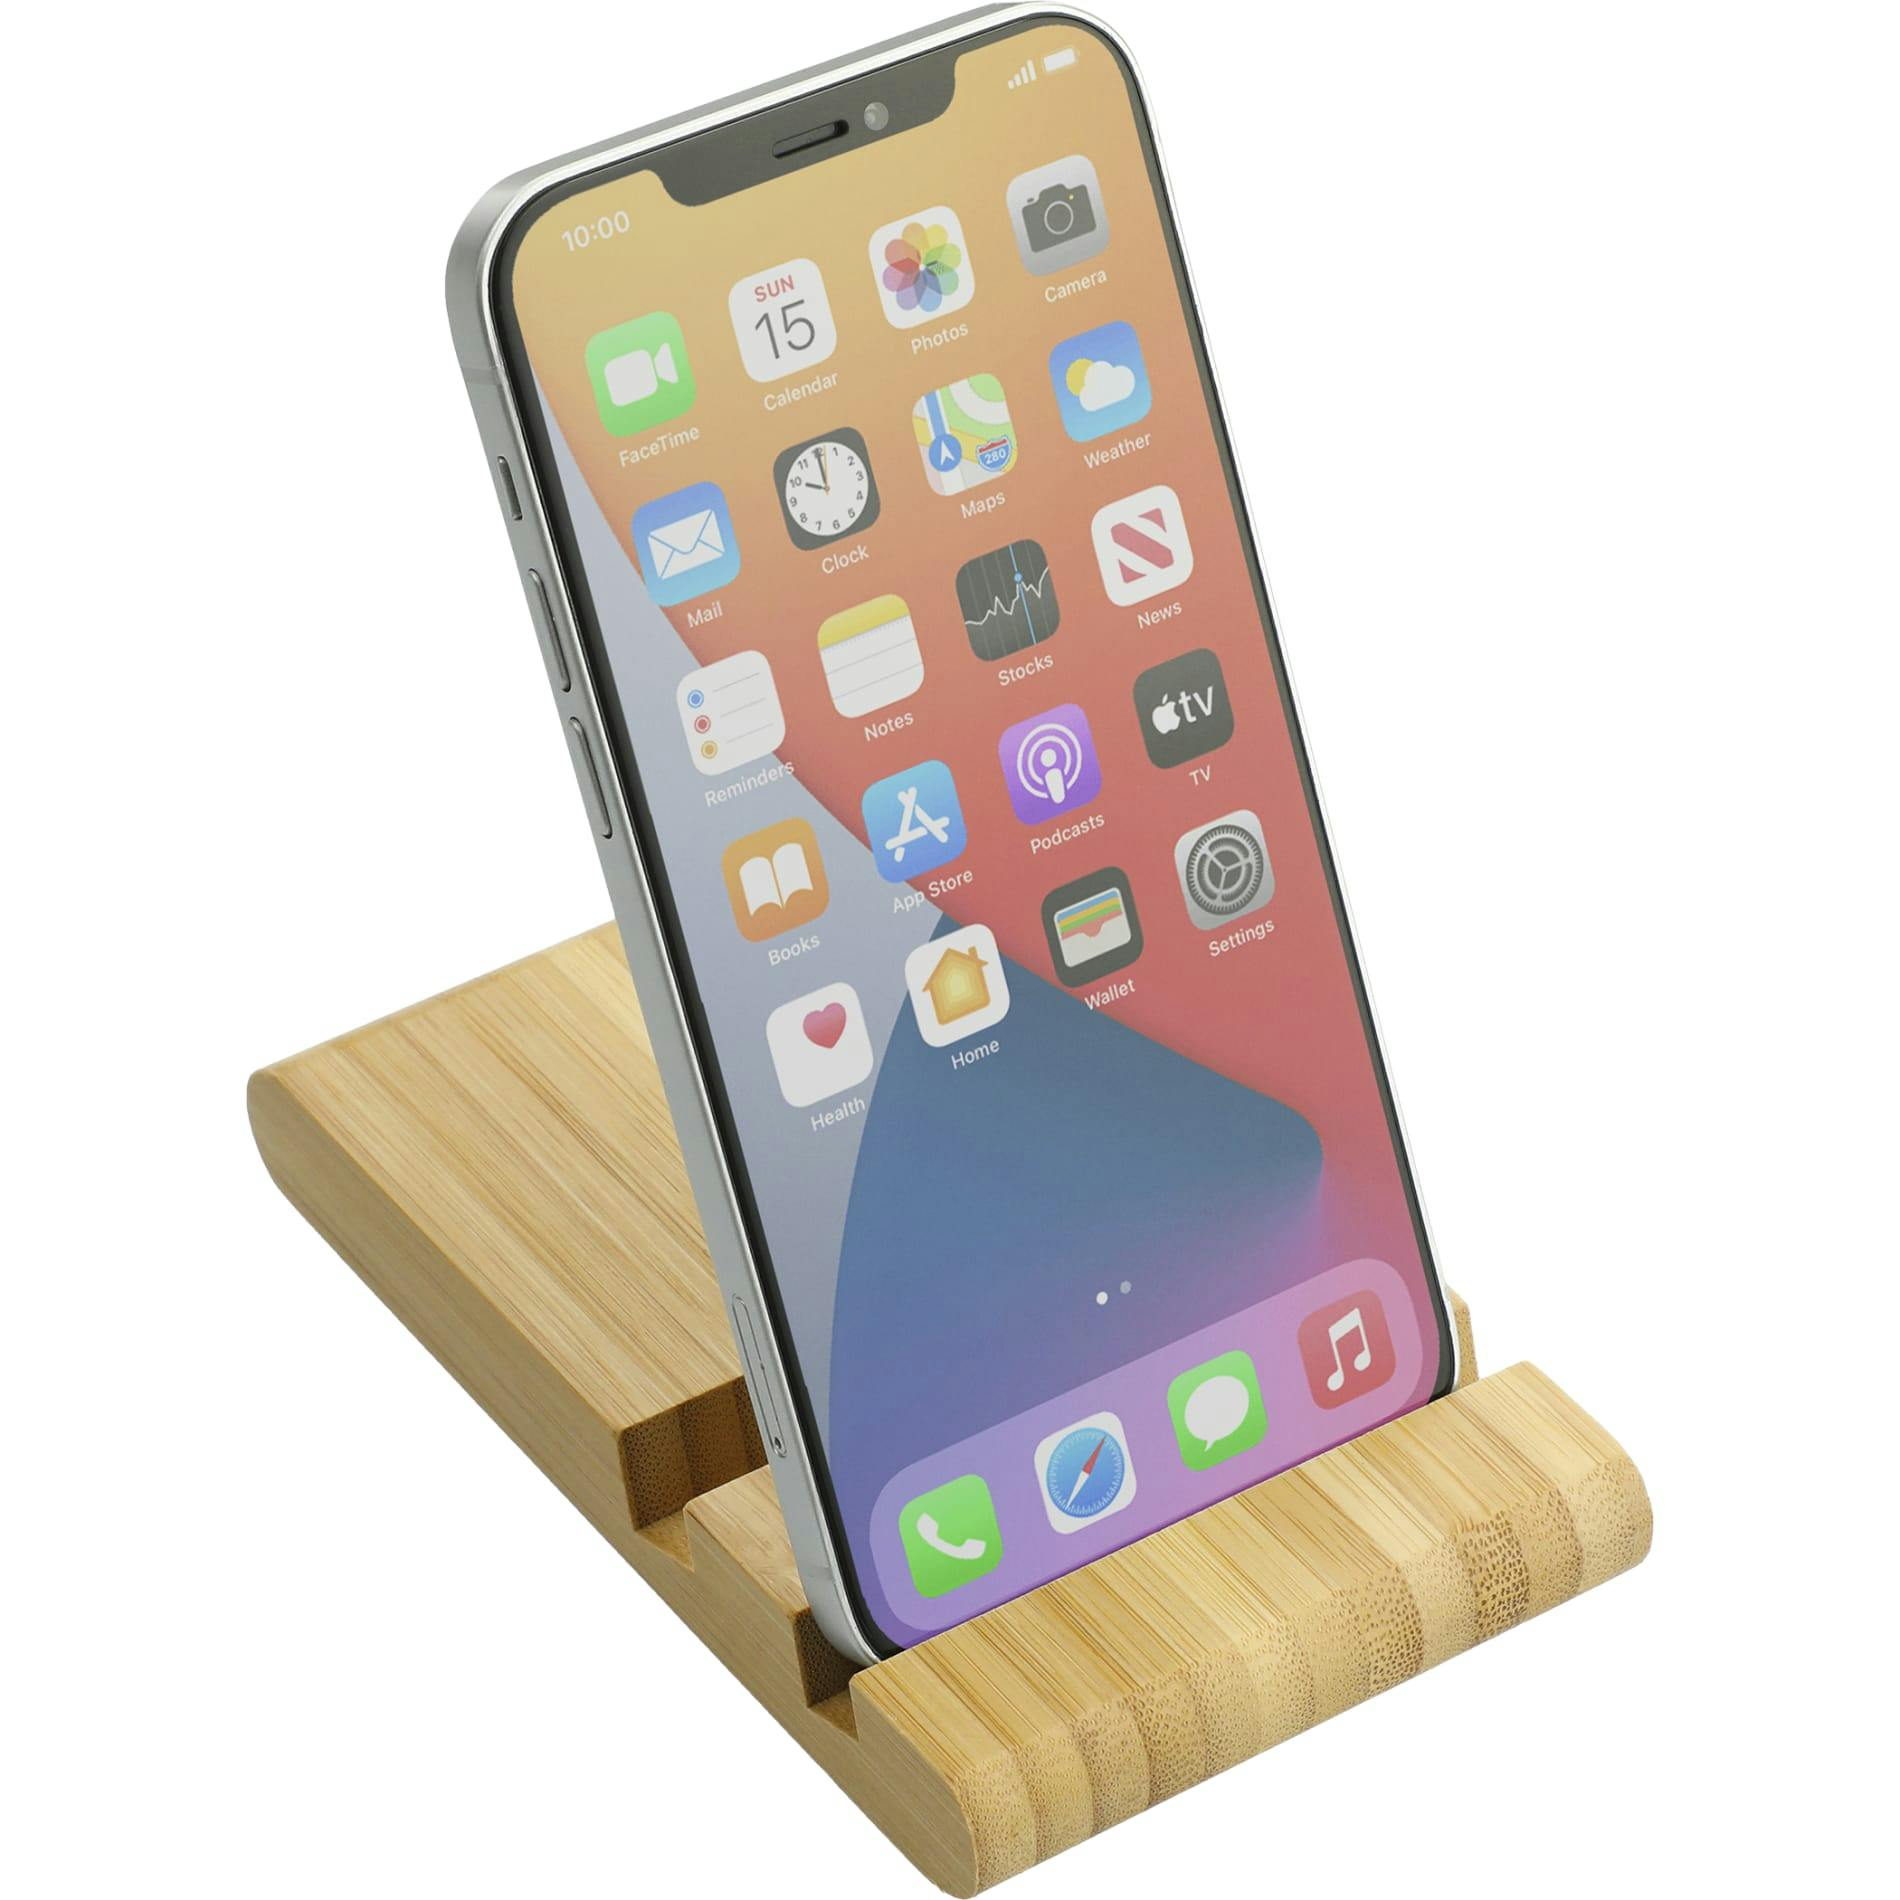 Estand Bamboo Phone and Tablet Stand - additional Image 2